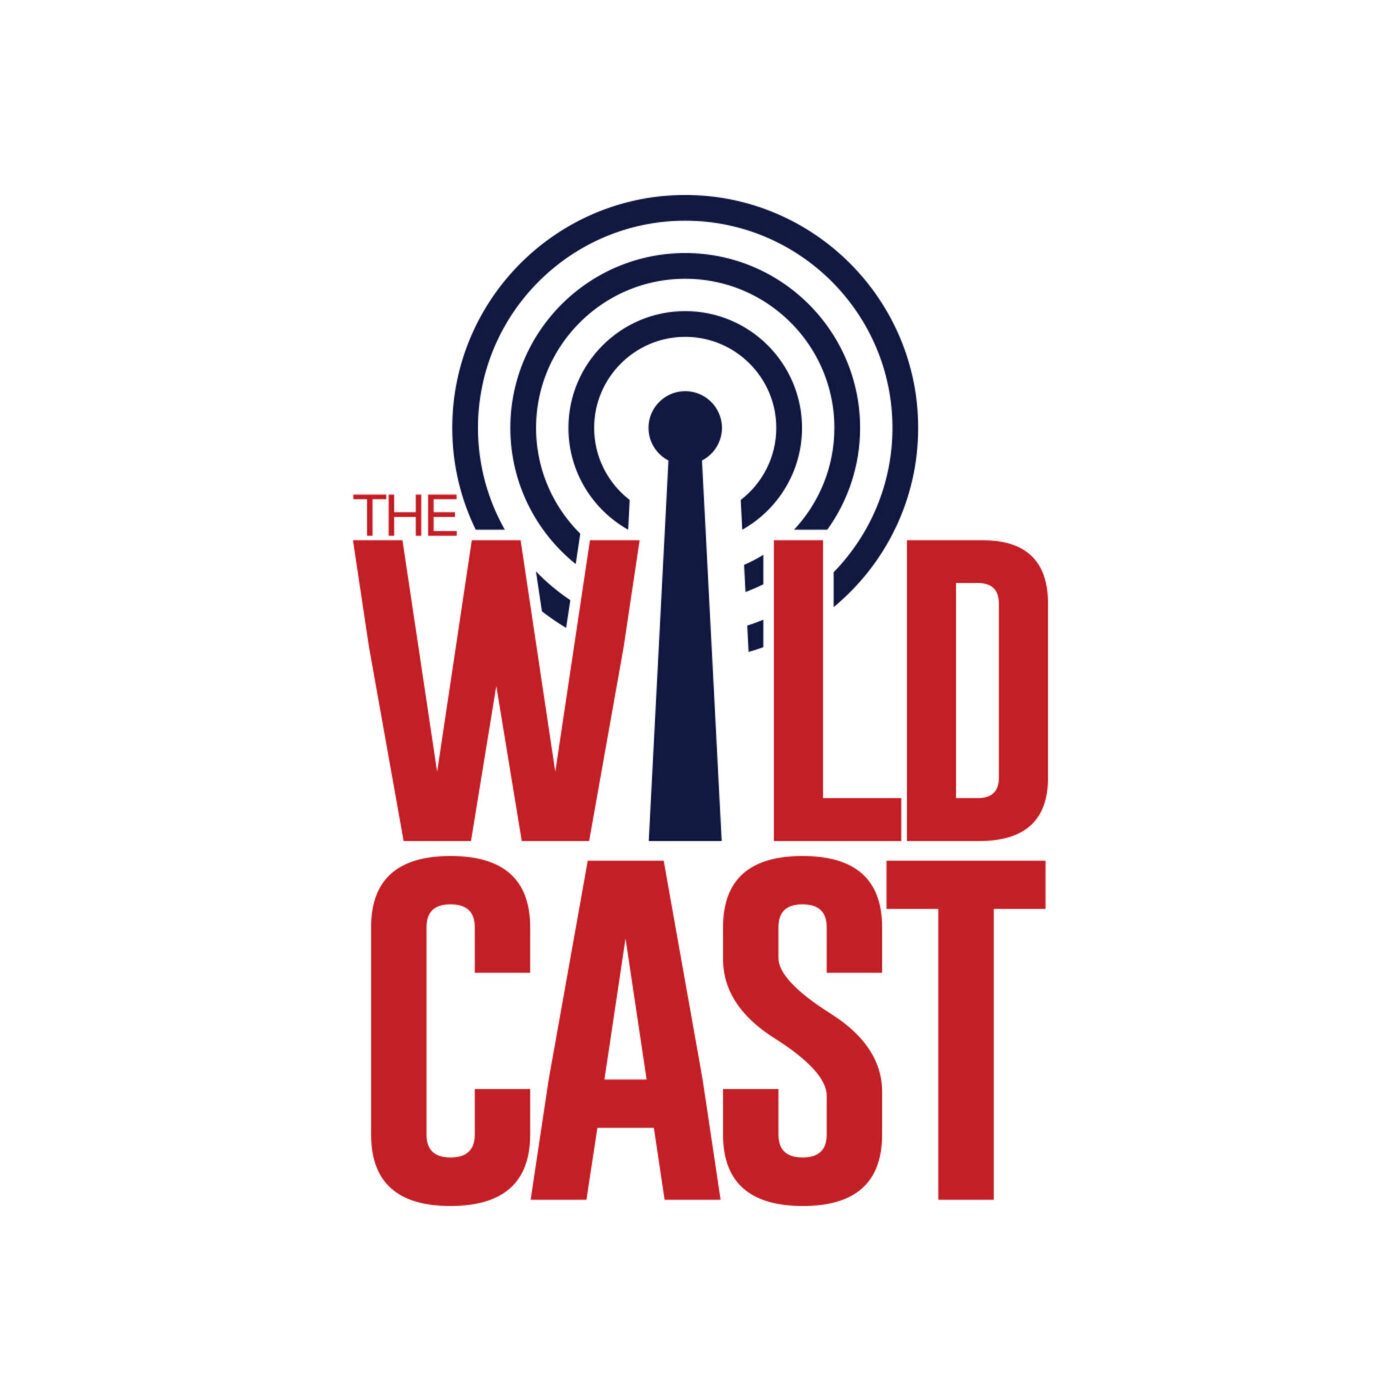 The Wildcast, Episode 362: Reflecting on Jedd Fisch's first season at Arizona